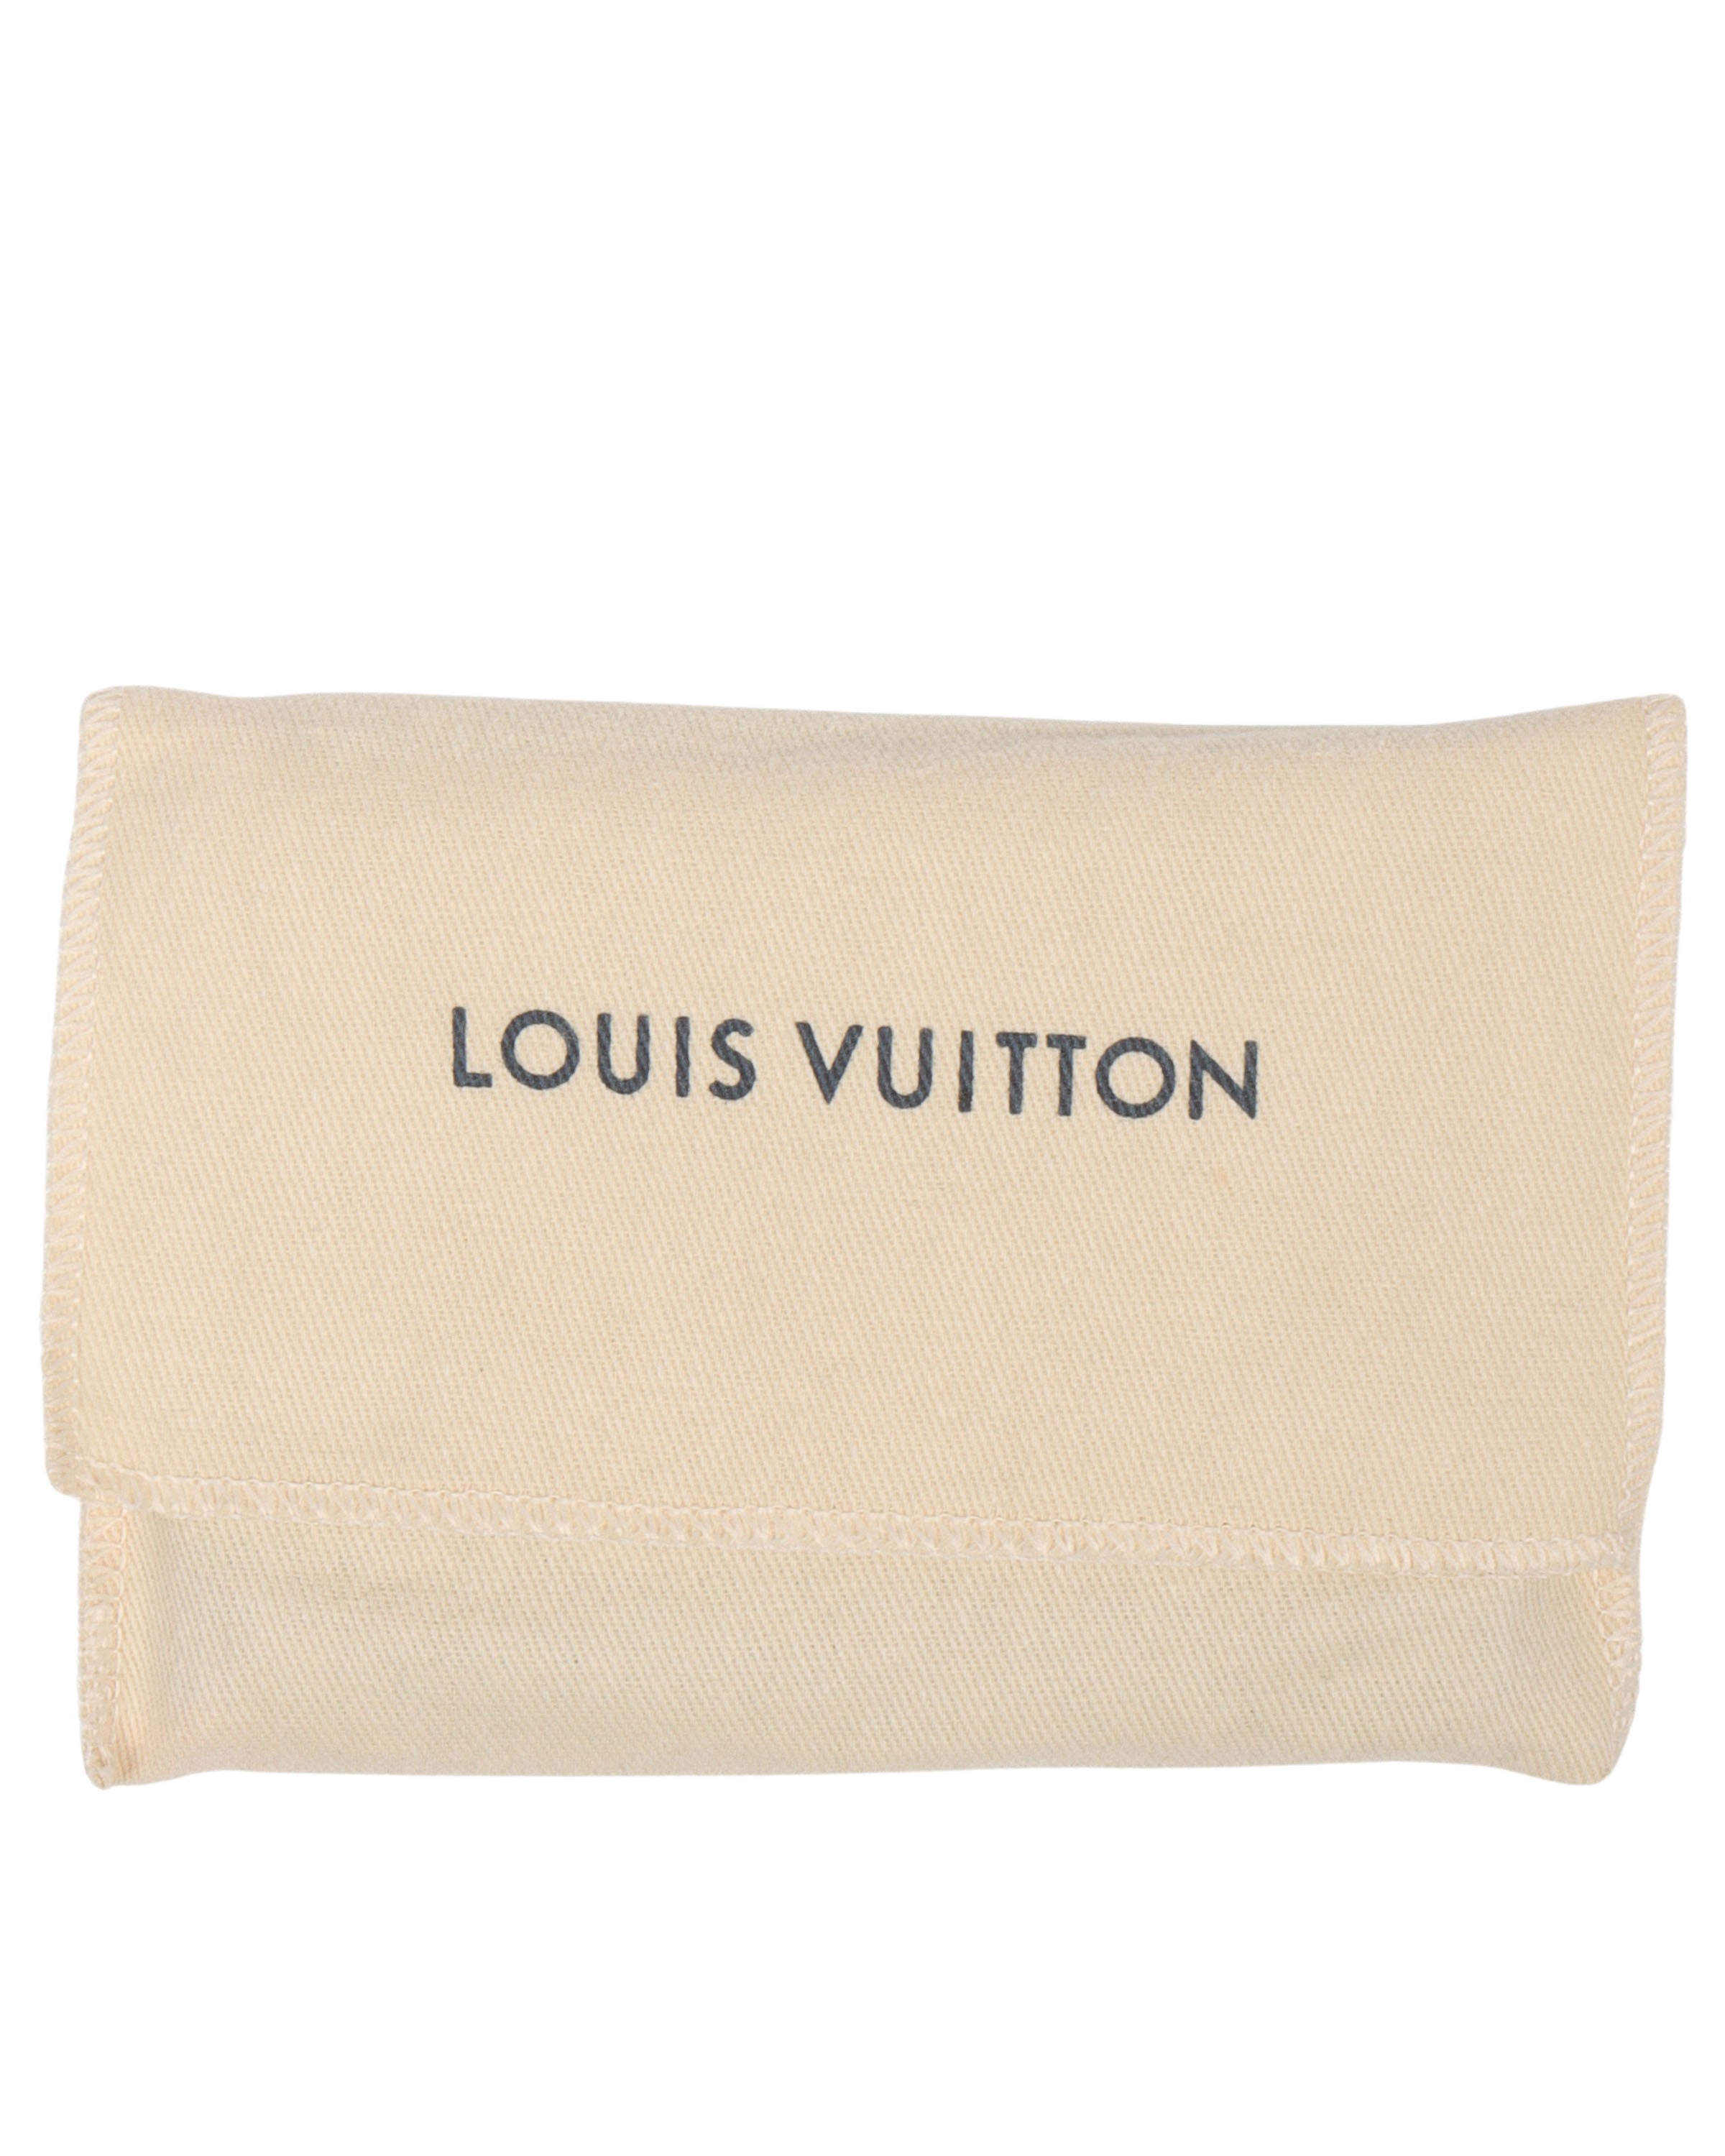 Louis Vuitton AUTHENTIC Virgil Abloh Solar Ray Hinge Wallet Used - Slightly  Used